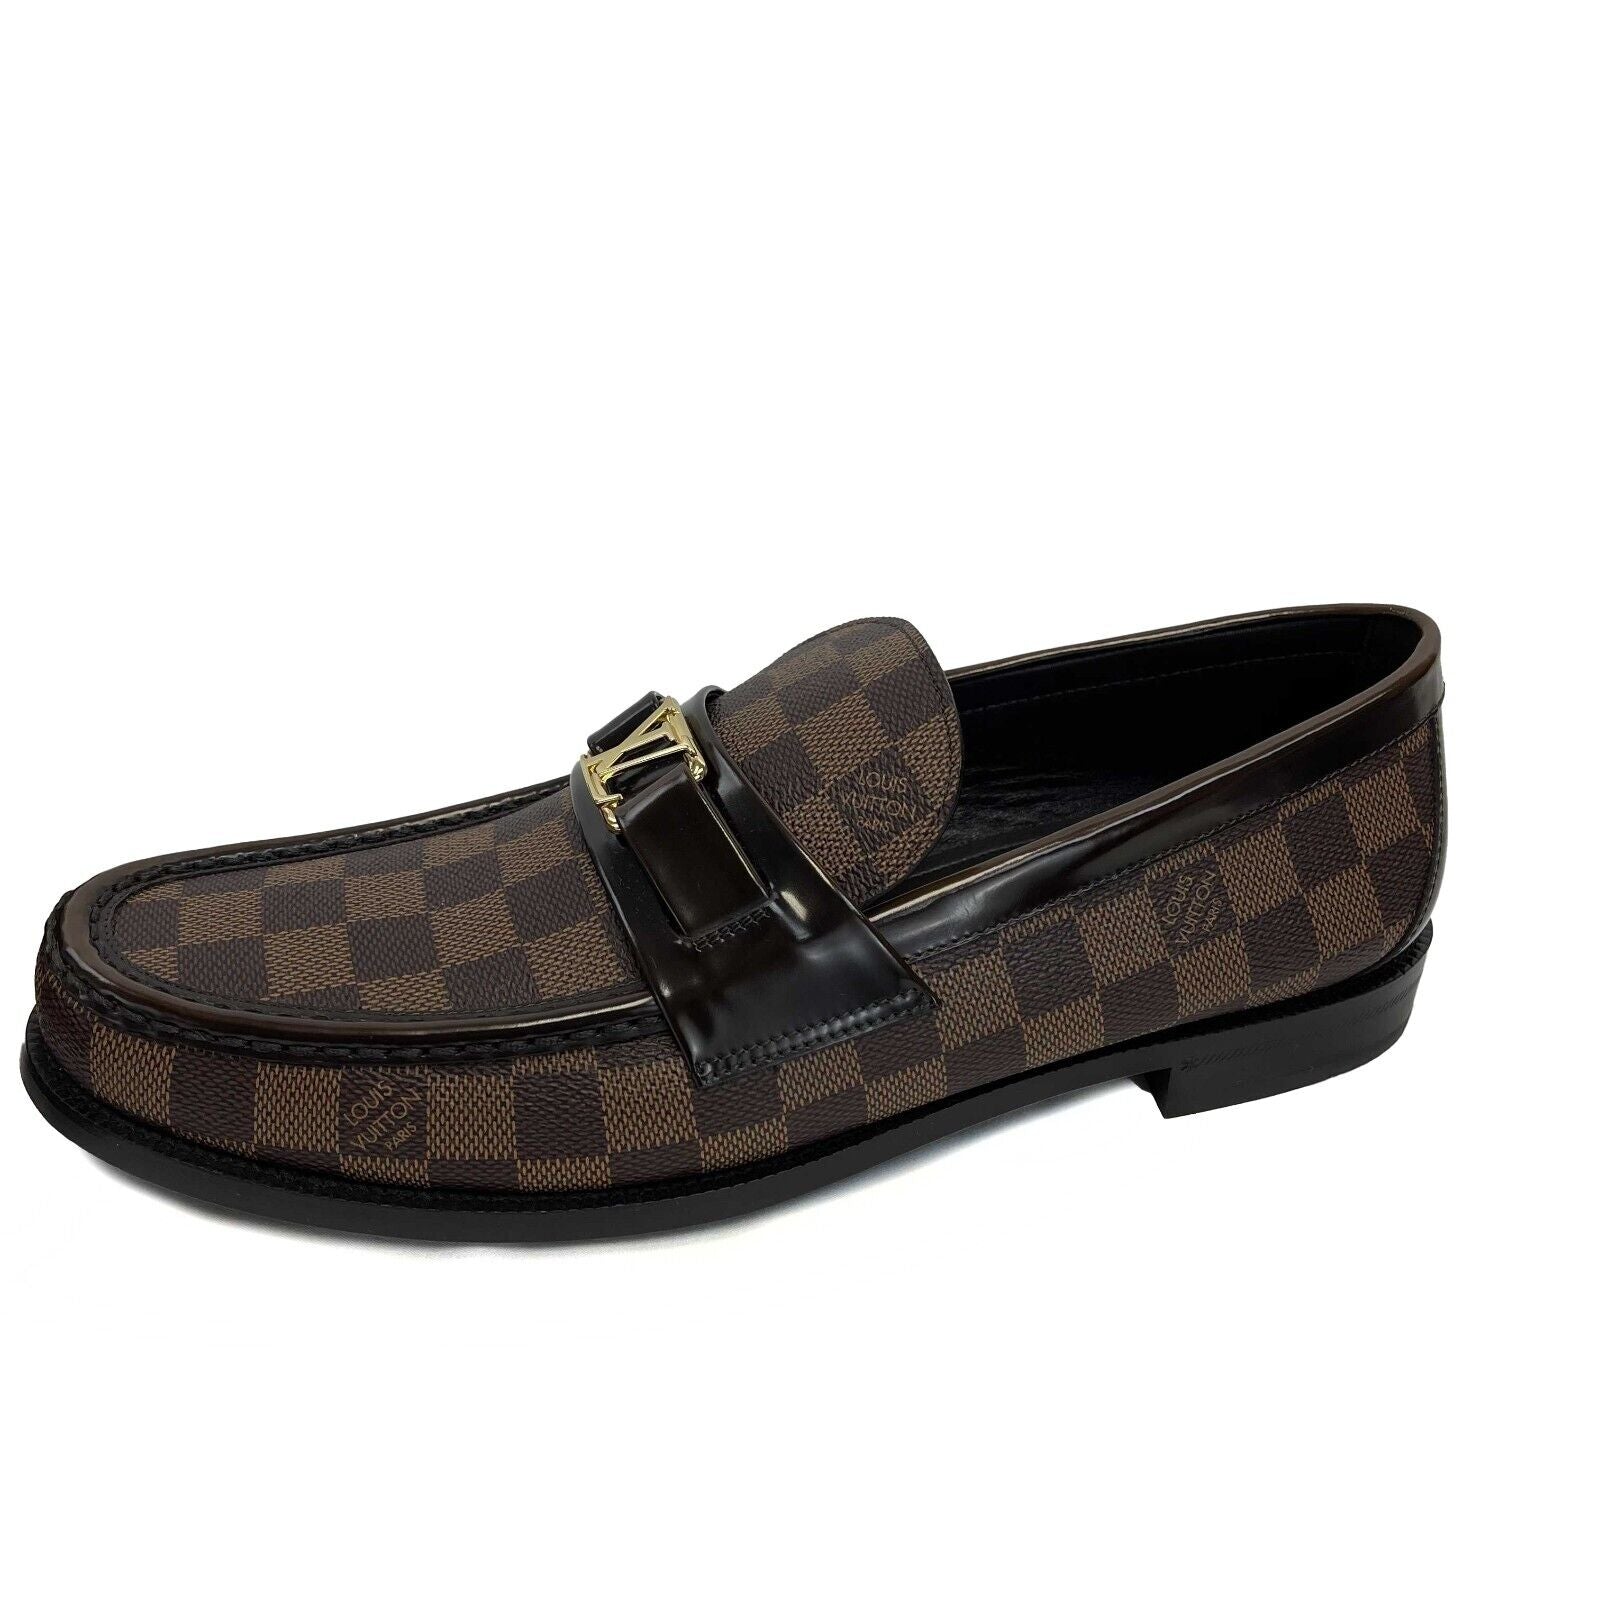 Louis Vuitton Major Loafer BROWN. Size 09.5